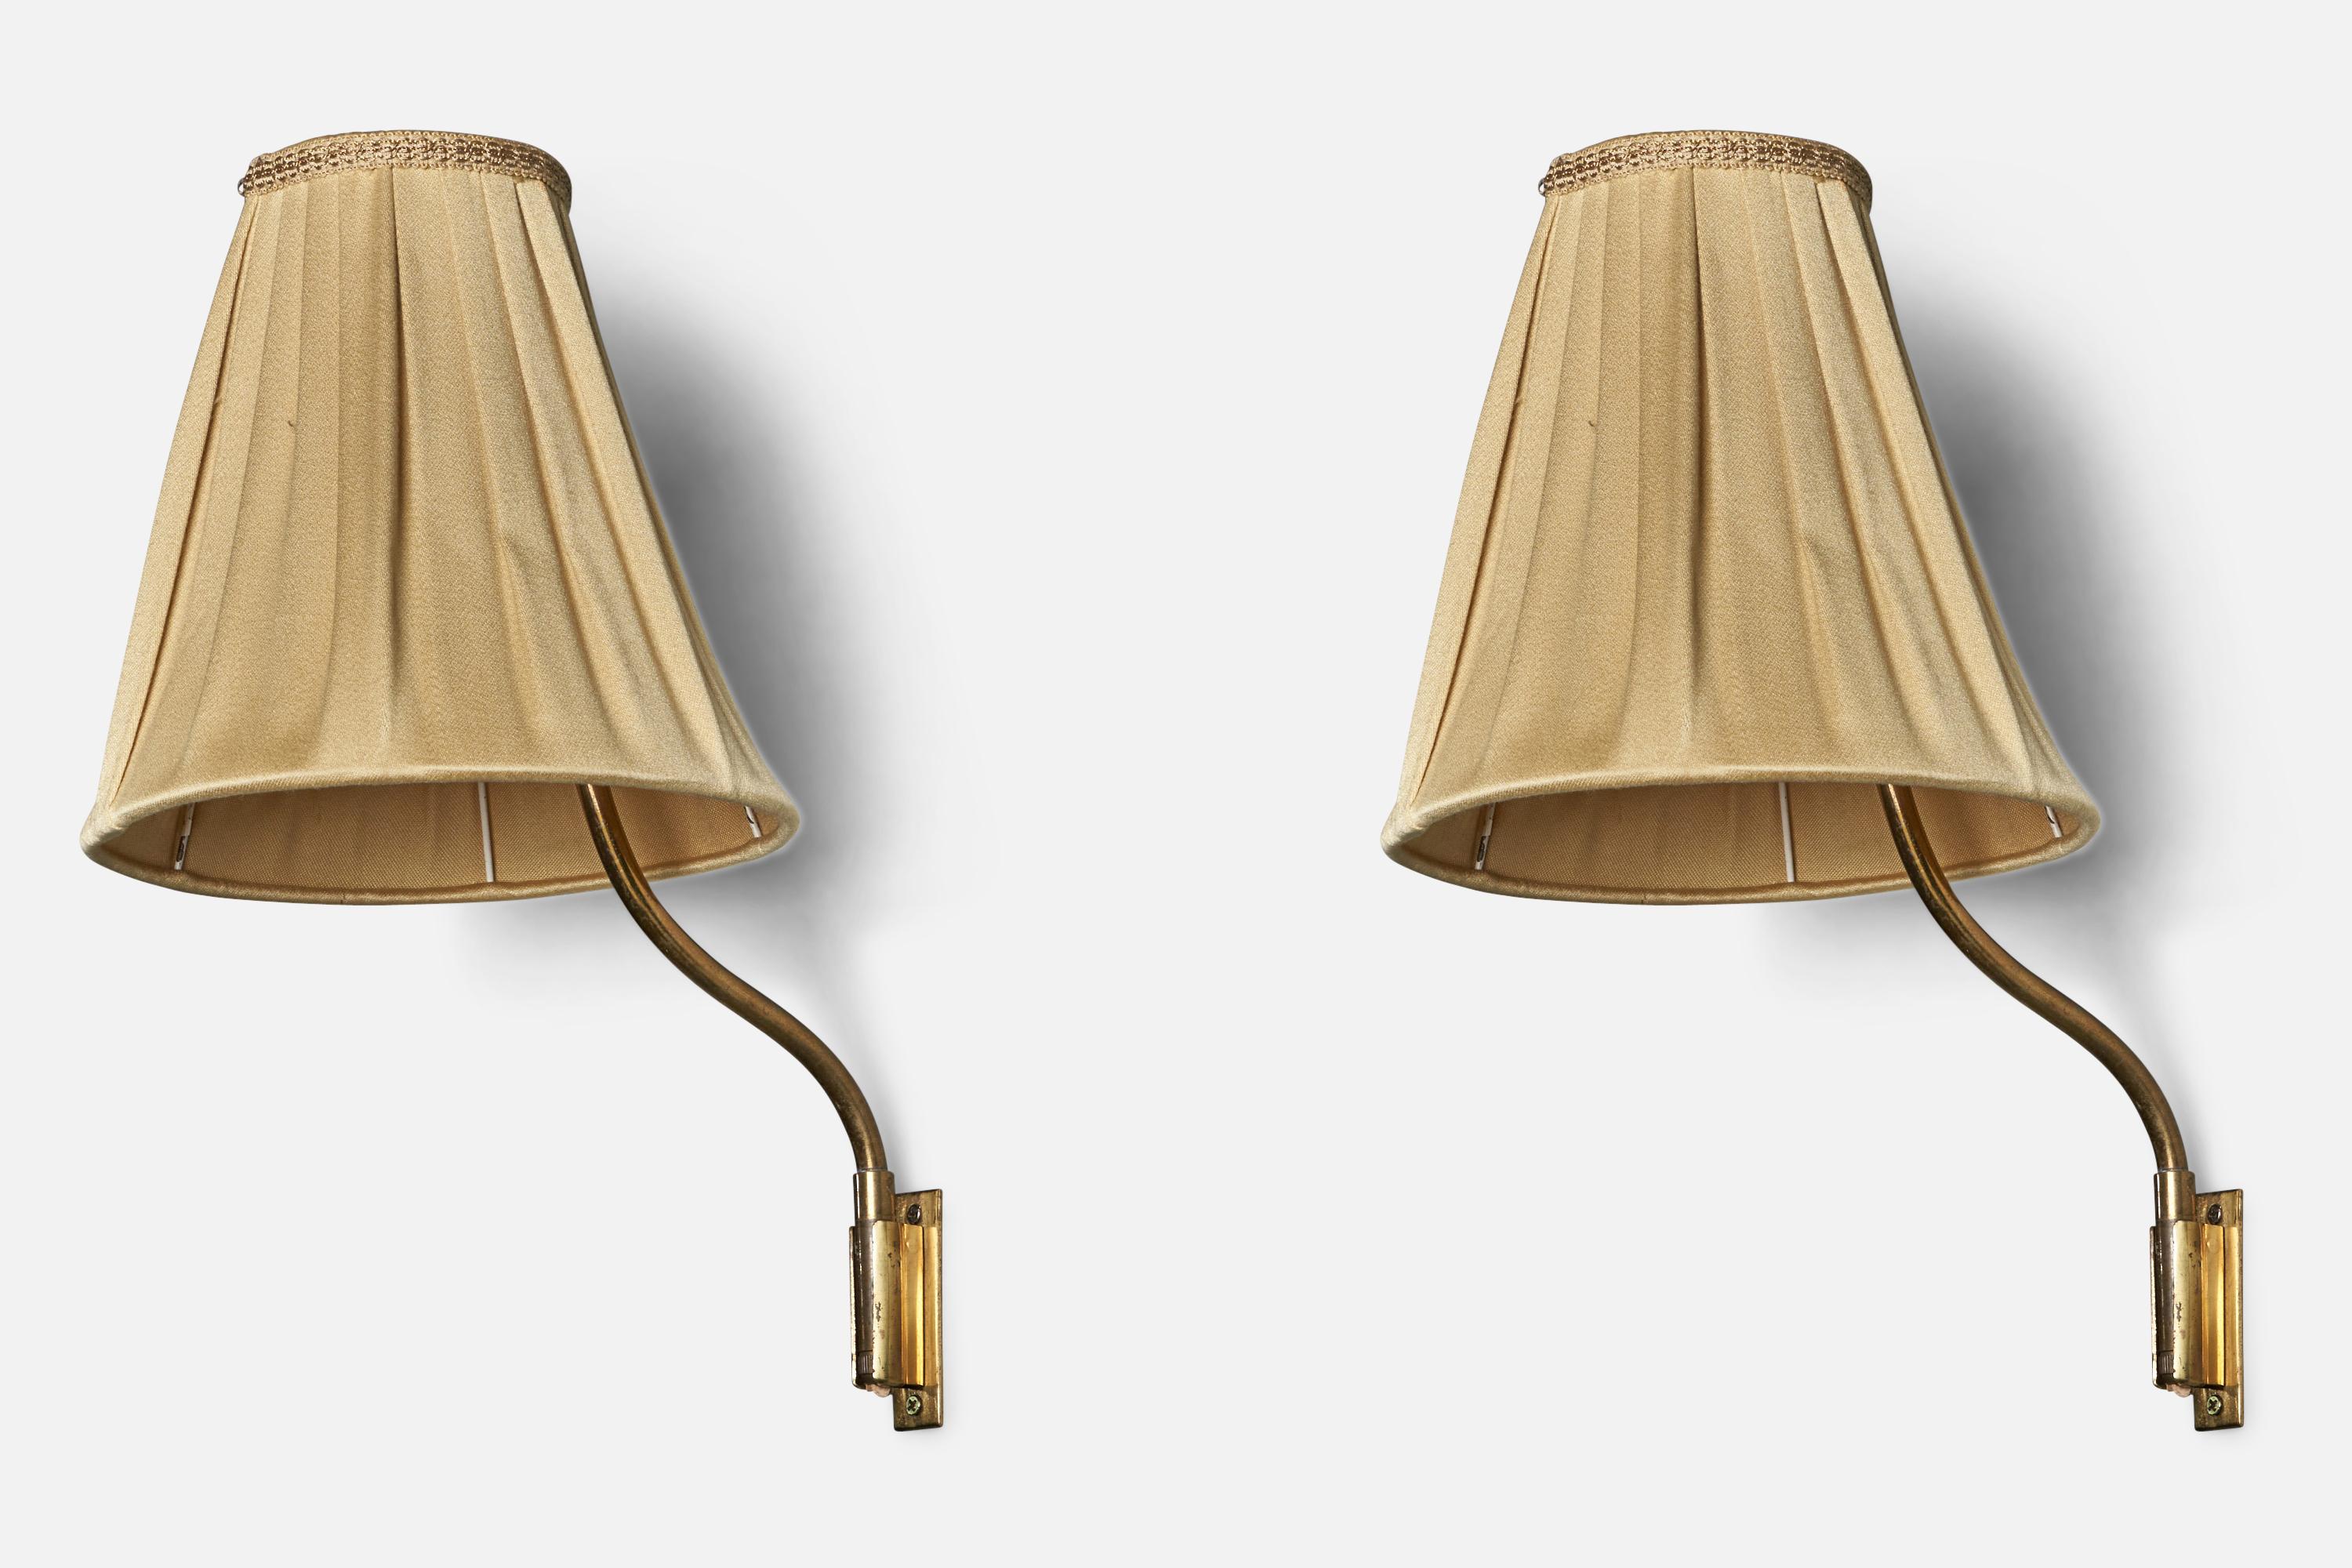 A pair of brass and fabric wall lights, designed by Lisa Johansson-Pape and produced by Ornö, Finland, 1950s.

Note fixtures are plug in with cord feeding from bottom of stem. Not convertible to hard wire.

Overall Dimensions (inches): 15